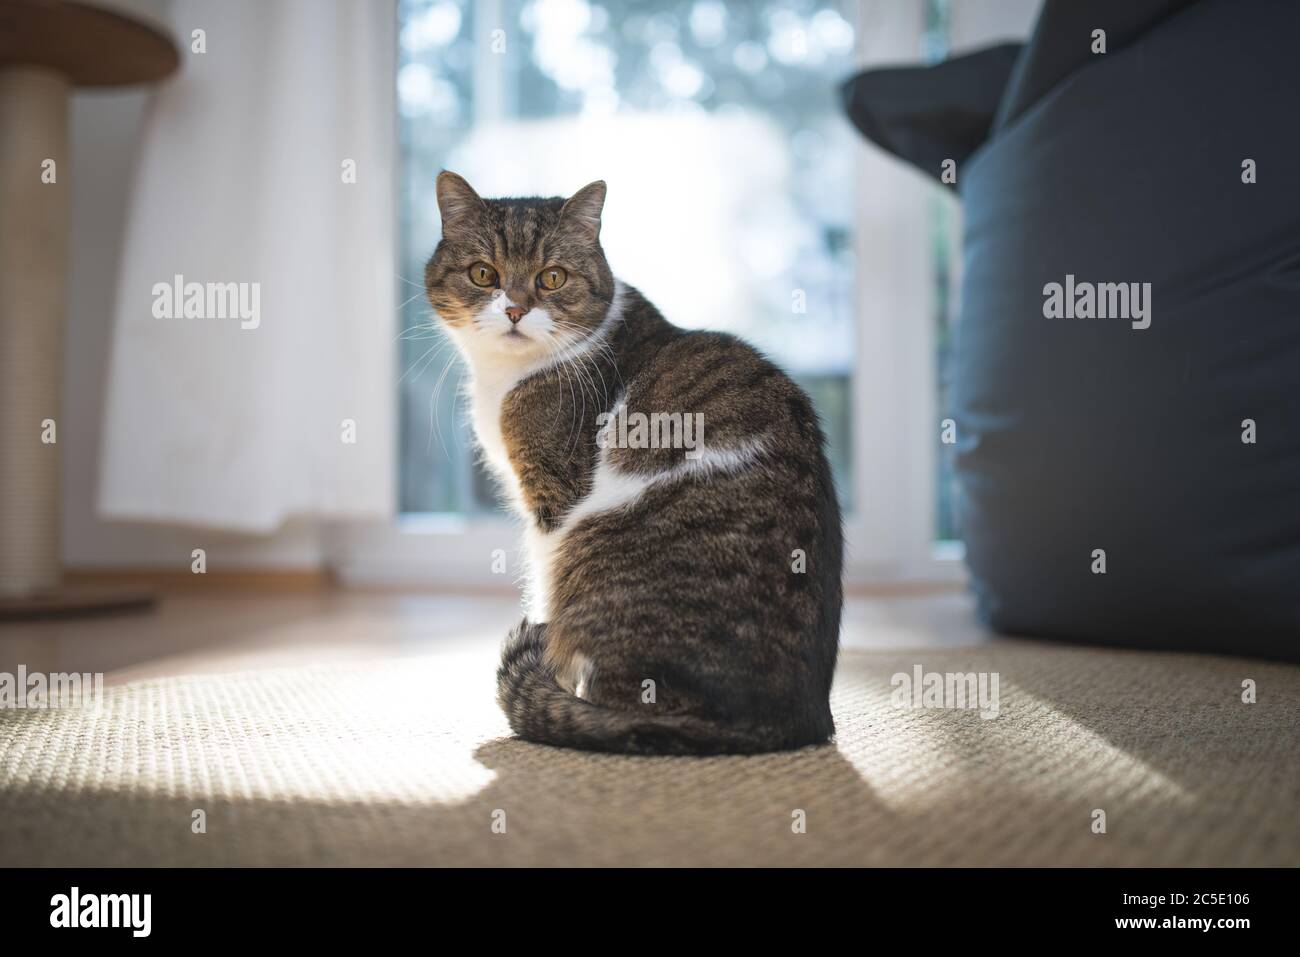 tabby british shorthair cat standing in front of window looking back over shoulder Stock Photo